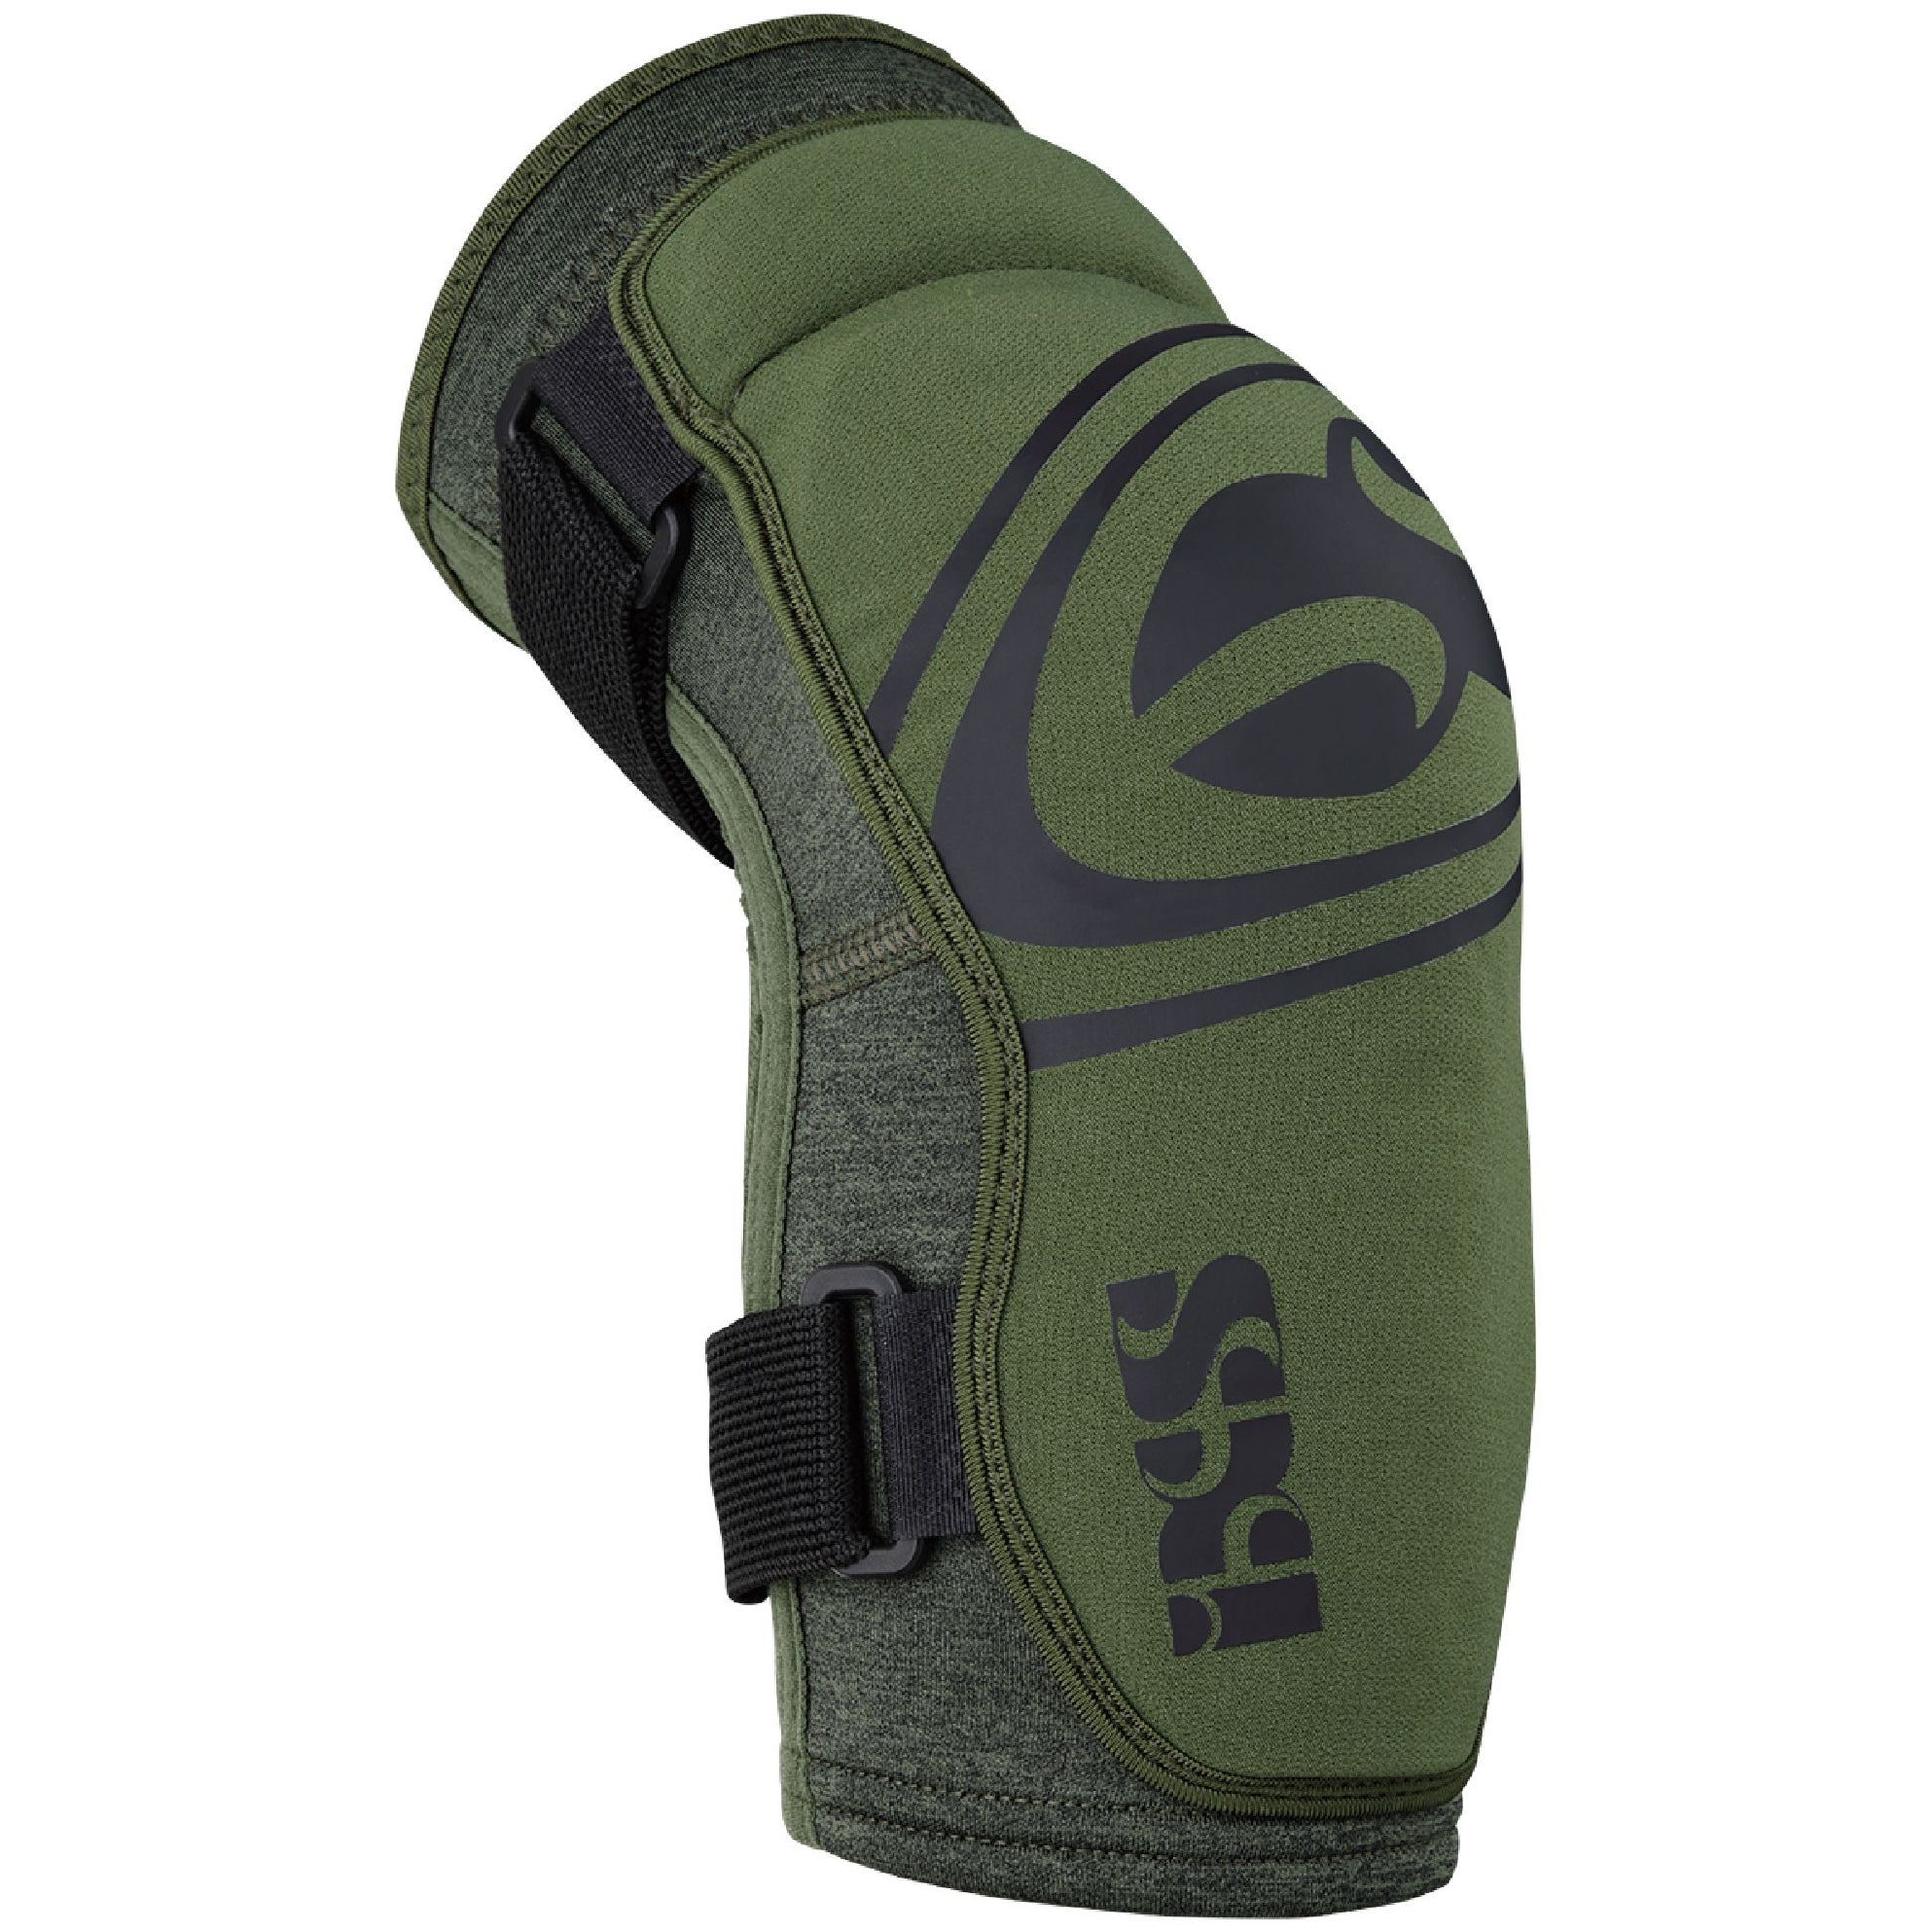 iXS Carve EVO+ Elbow Guards Olive Protective Gear